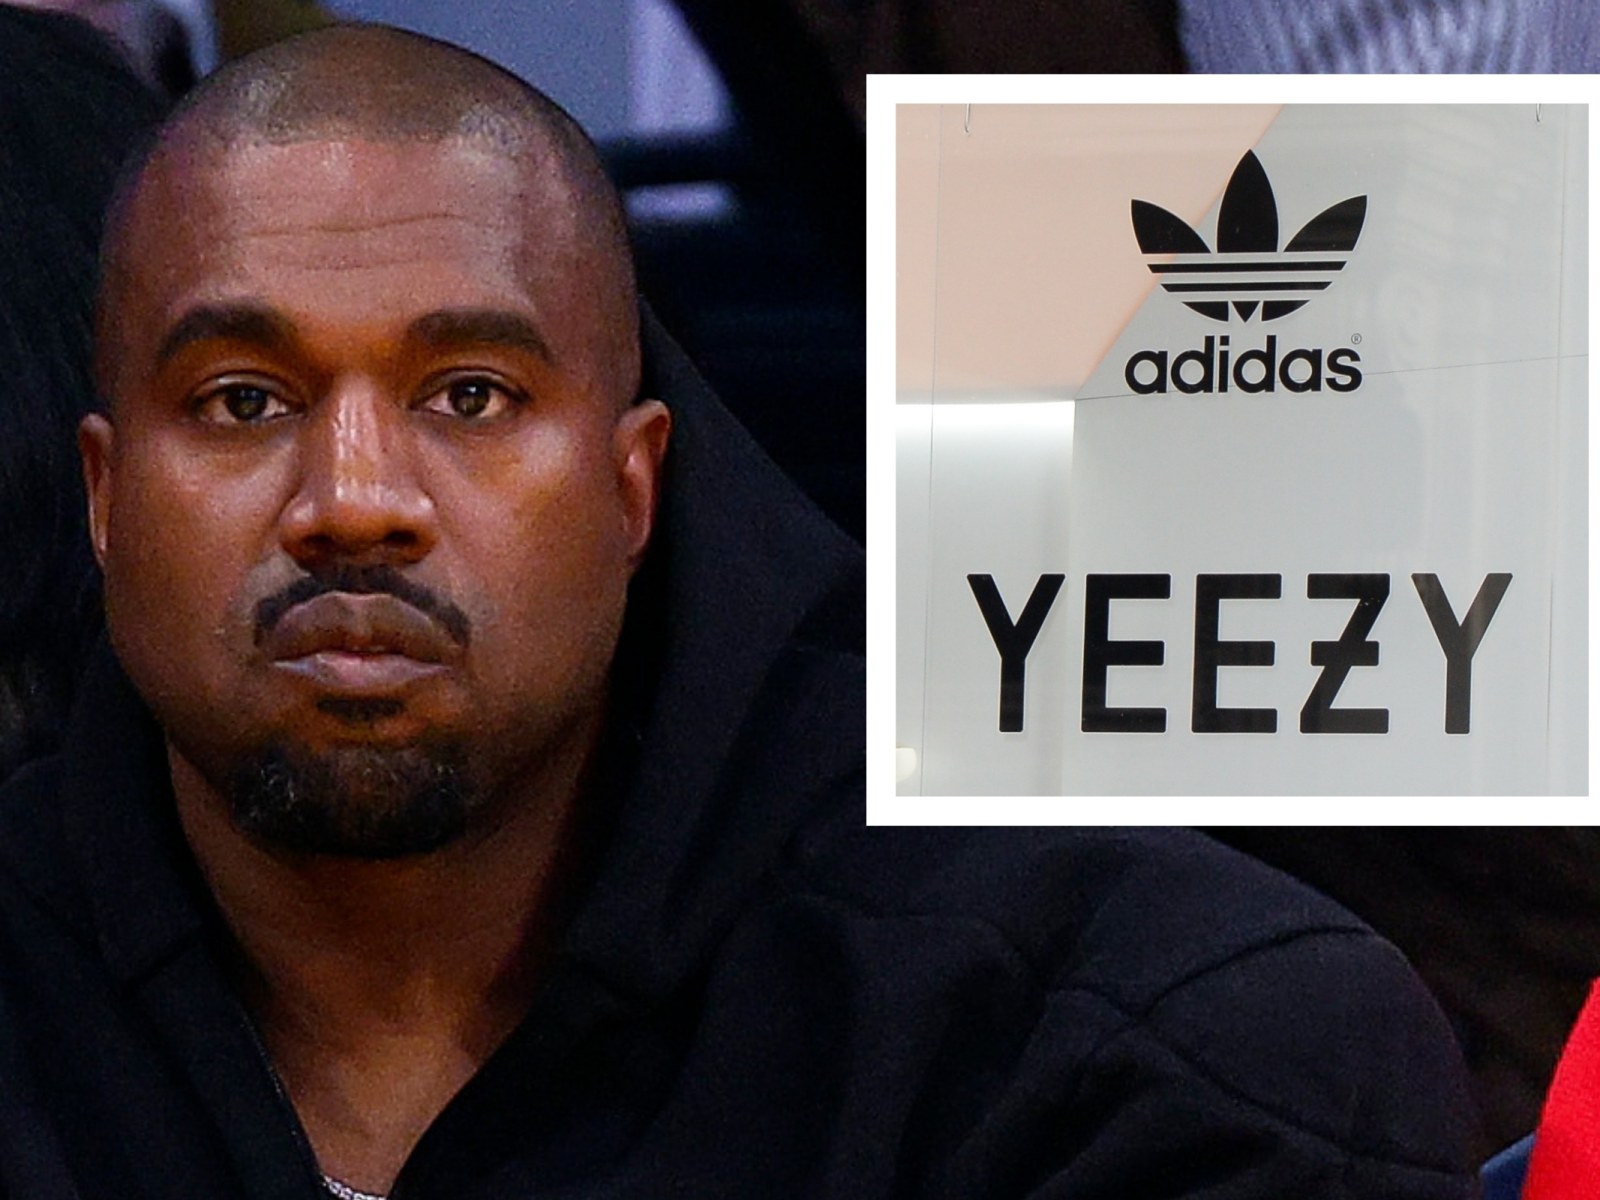 What's Next for Kanye West's Brand as Adidas Feud Continues